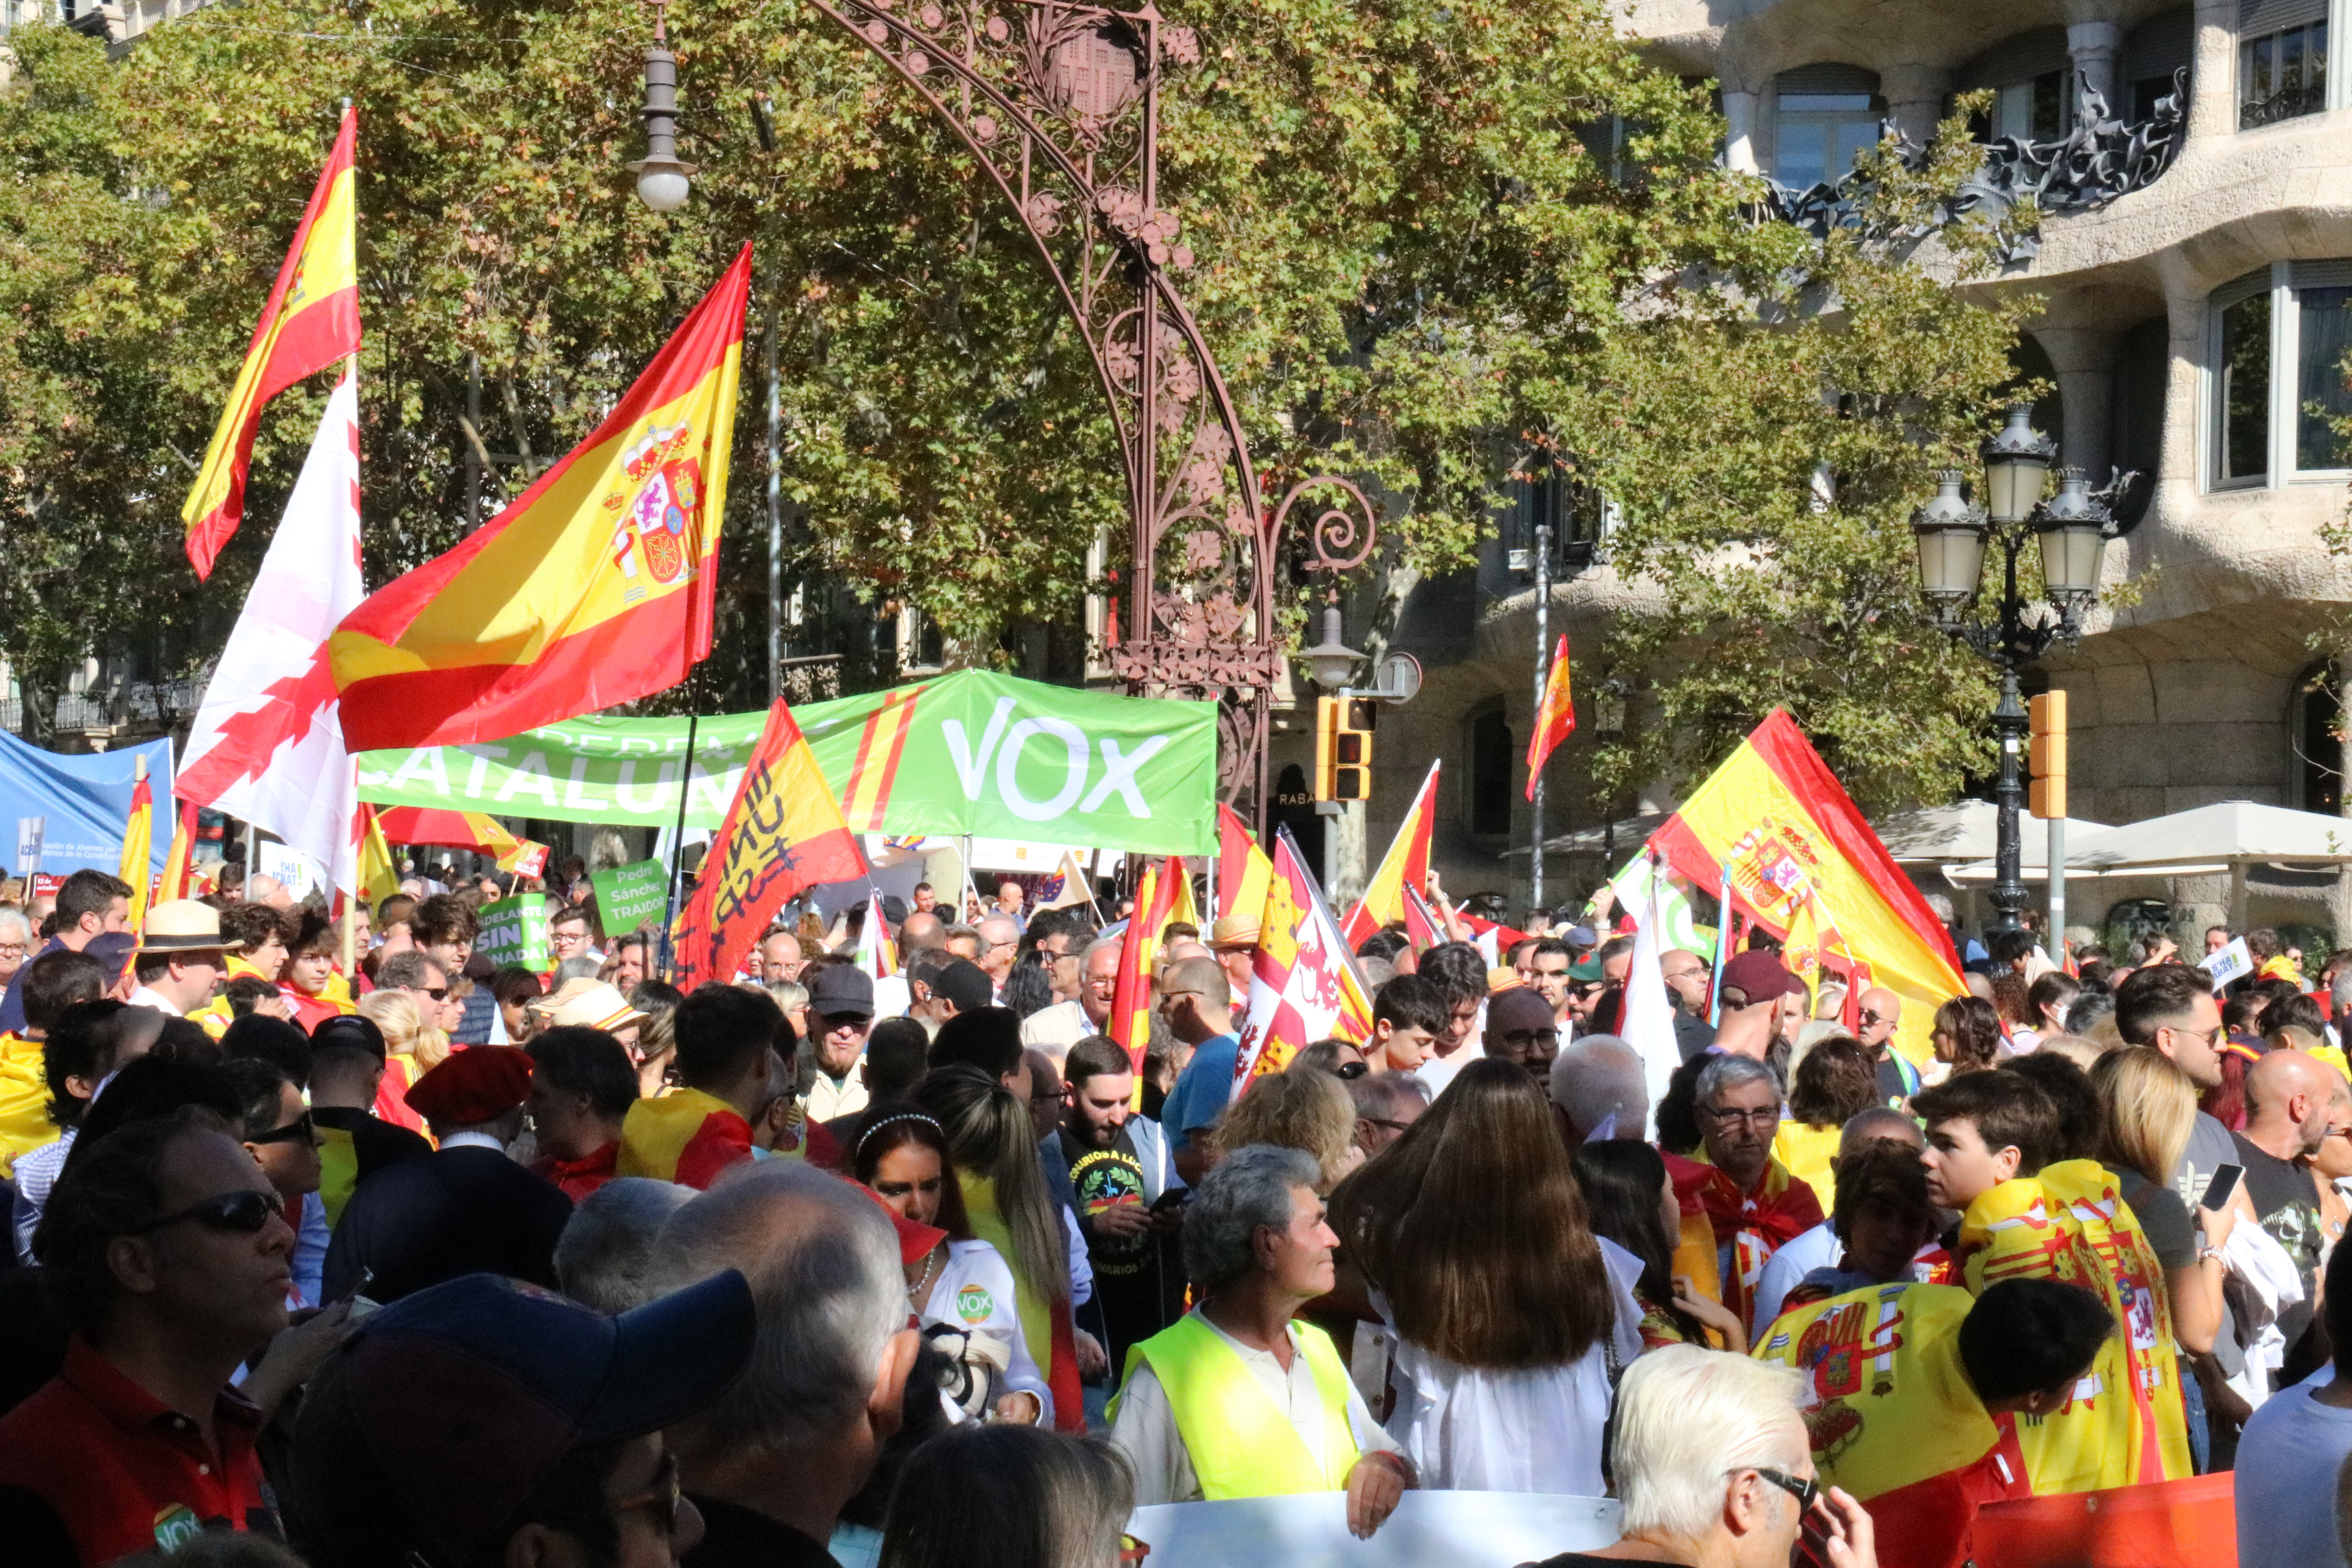 Spanish and far-right Vox party flags seen during a demonstration in the center of Barcelona on Spain's National Day, October 12, 2022